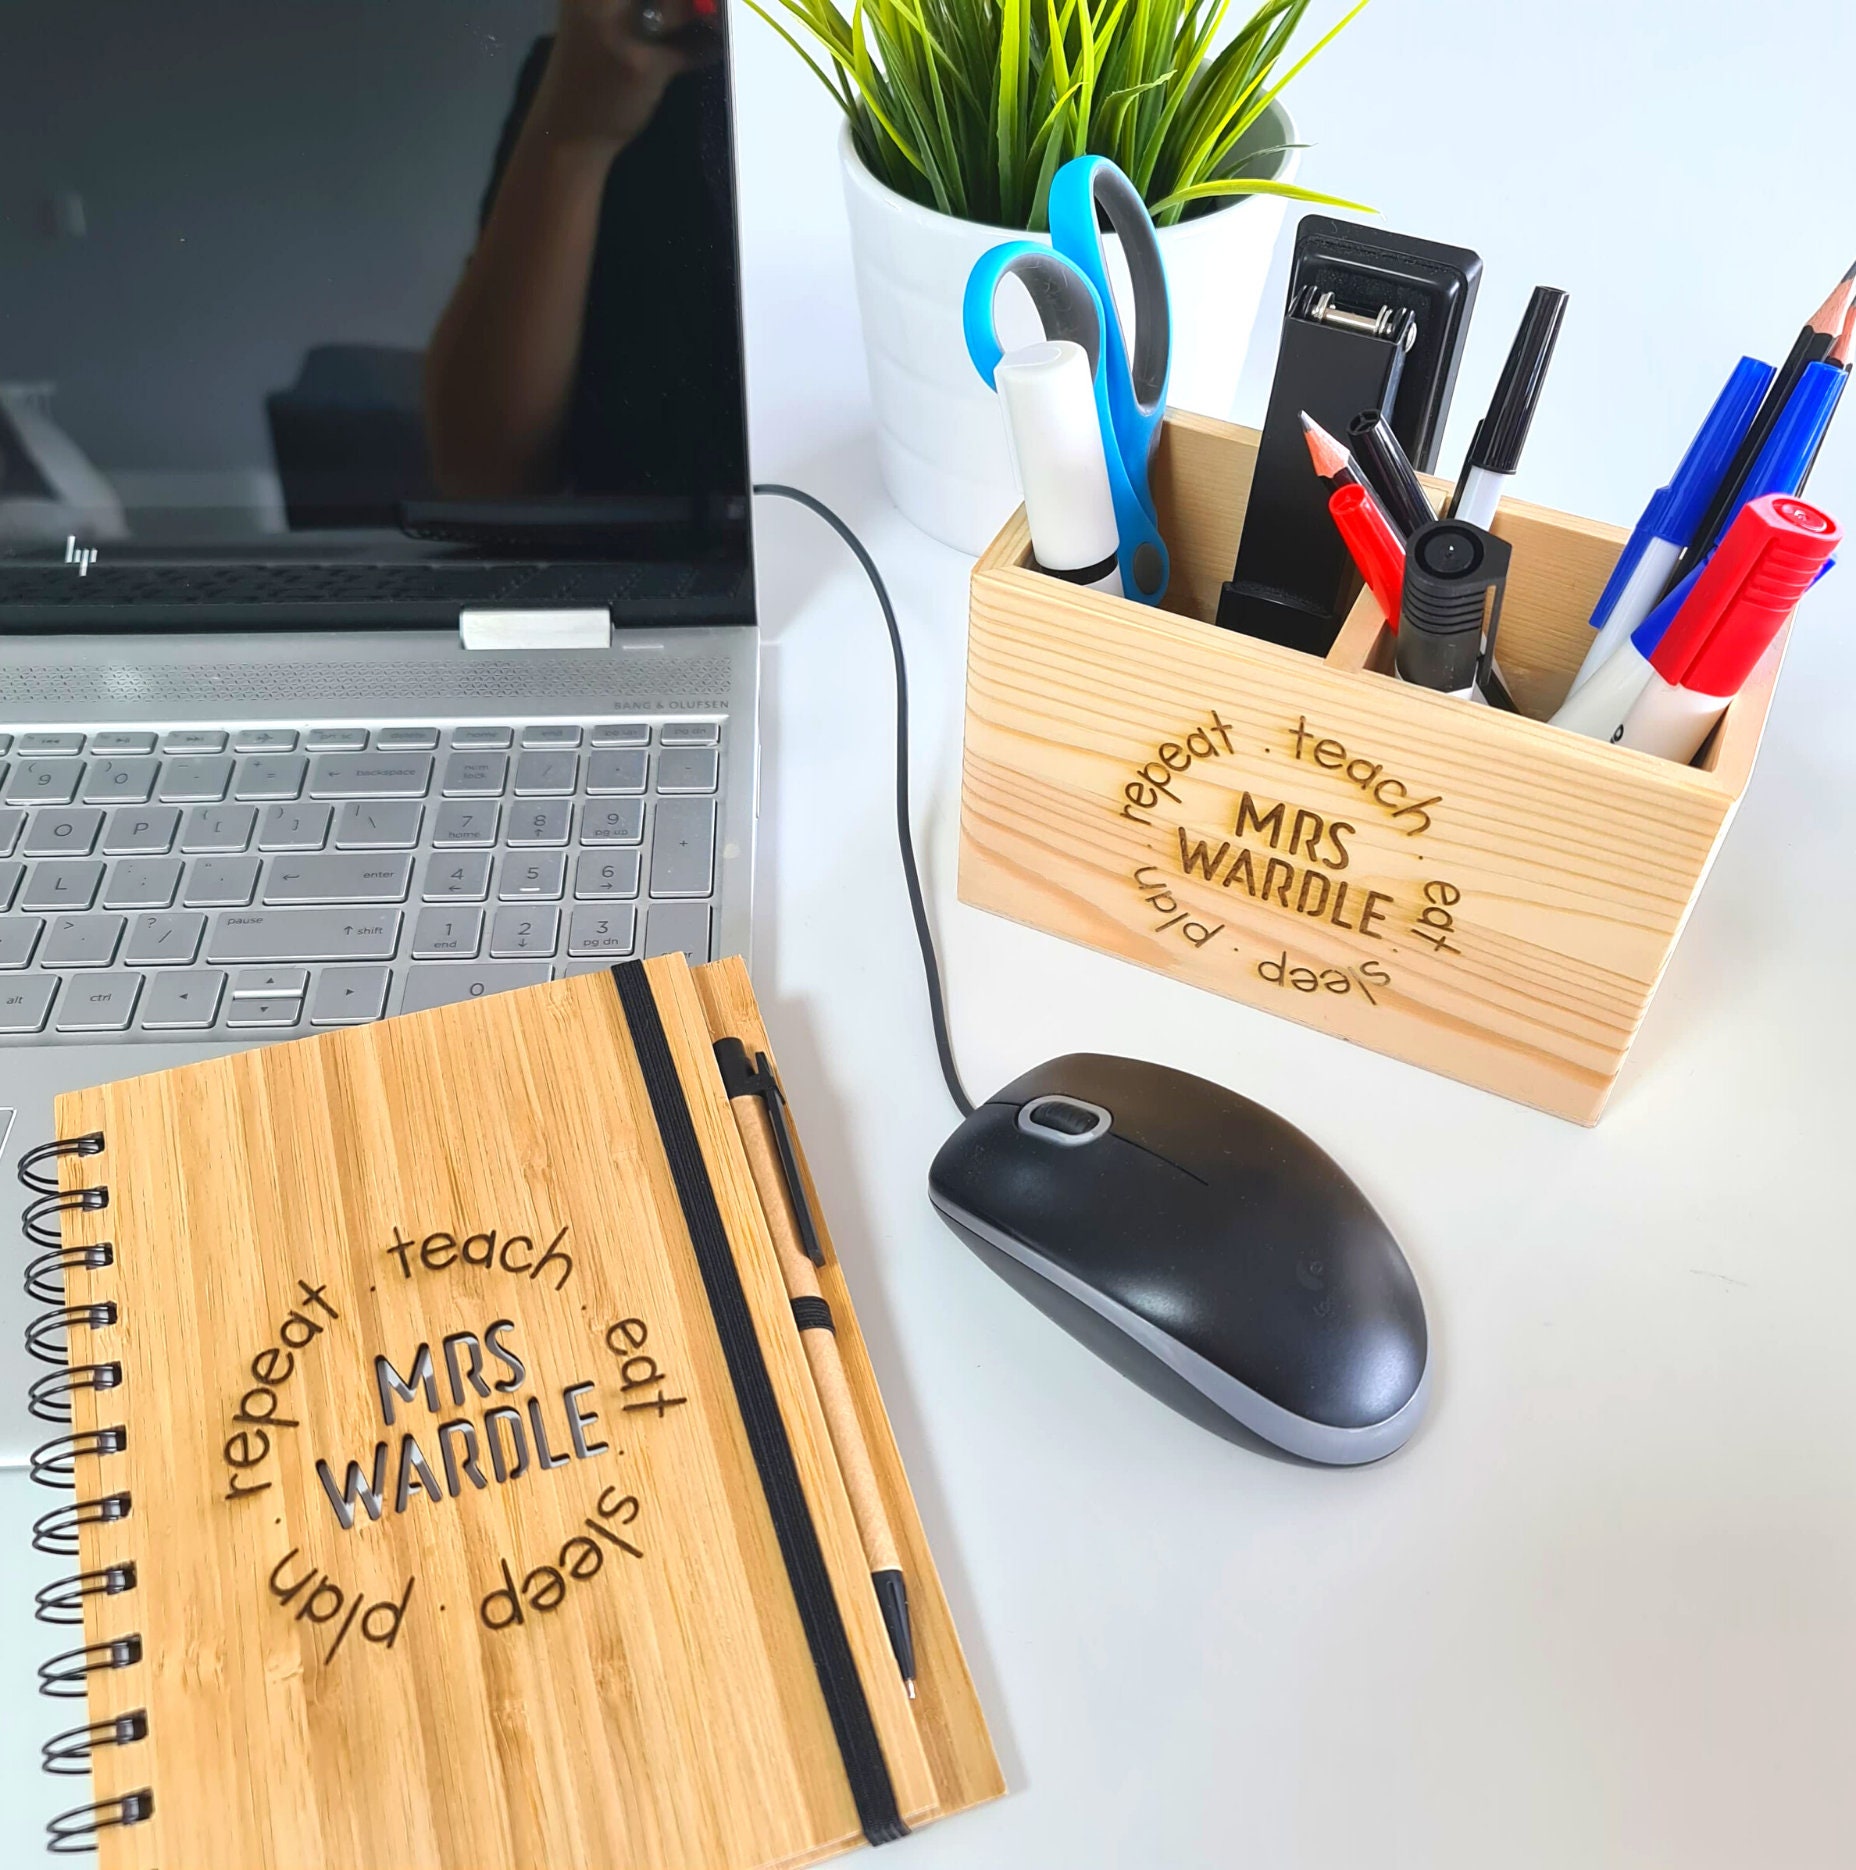 Personalized Writer's Block Gifts for Writers Writing Gifts Writers Gift  Professor Gift Pen Holder Desk Set Desk Organizer 